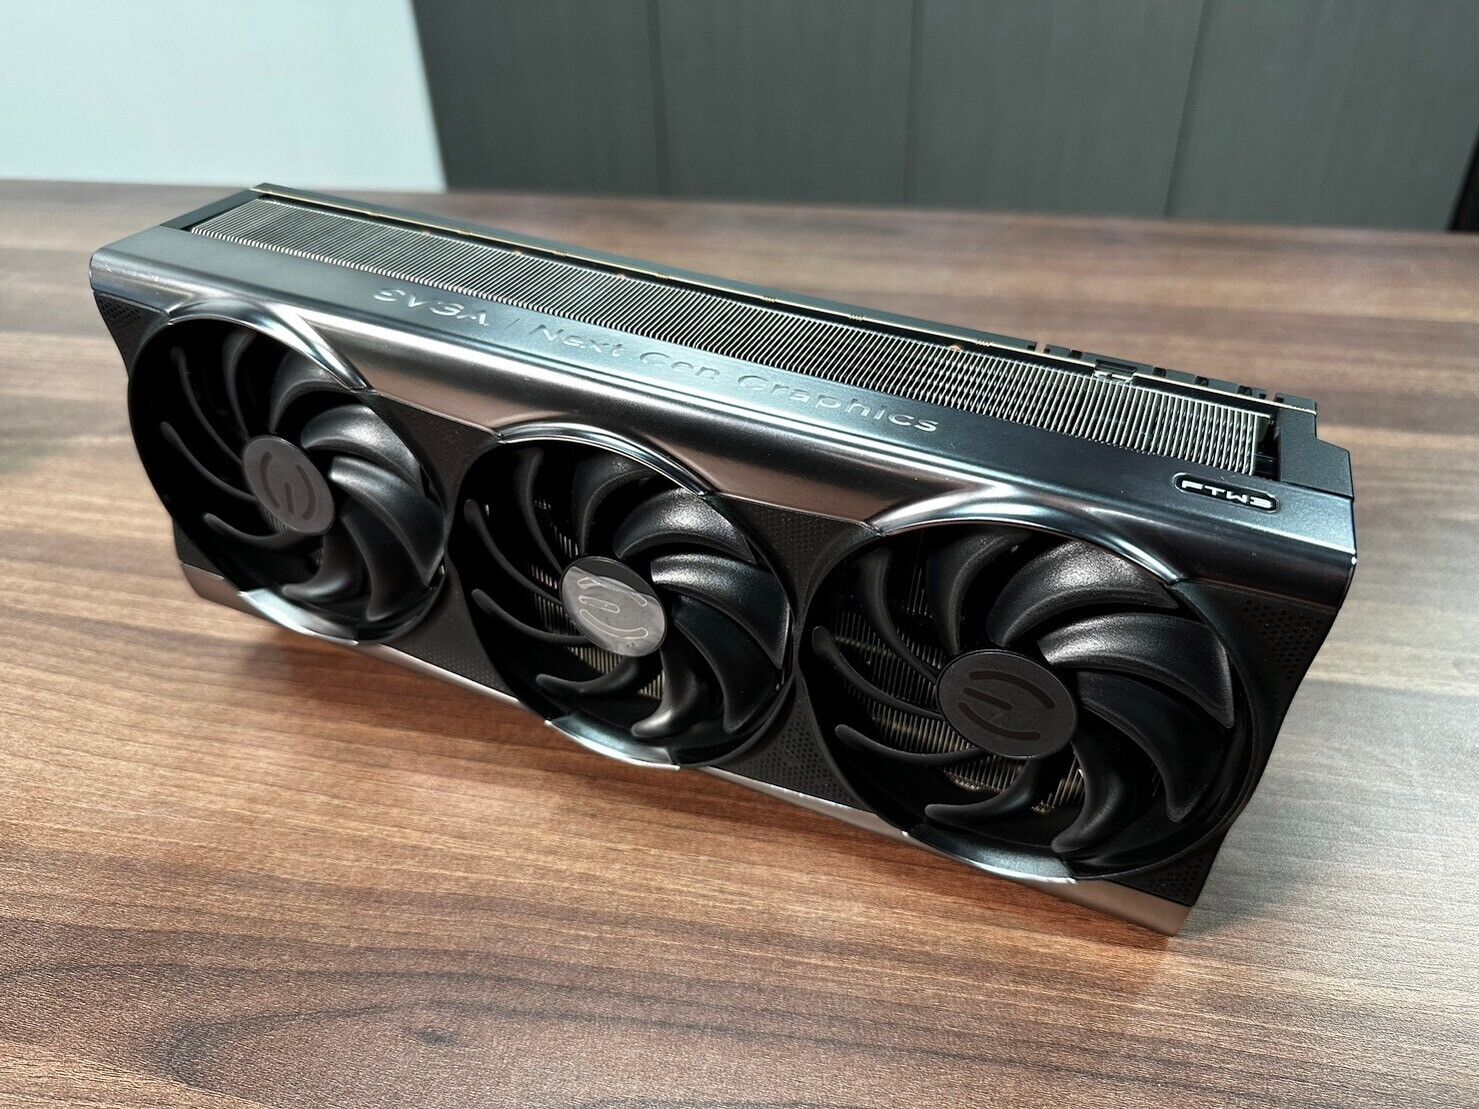 [Updated] EVGA will auction off a prototype of the cancelled GeForce RTX 4090 FTW3 graphics card on eBay and donate all the money to charity